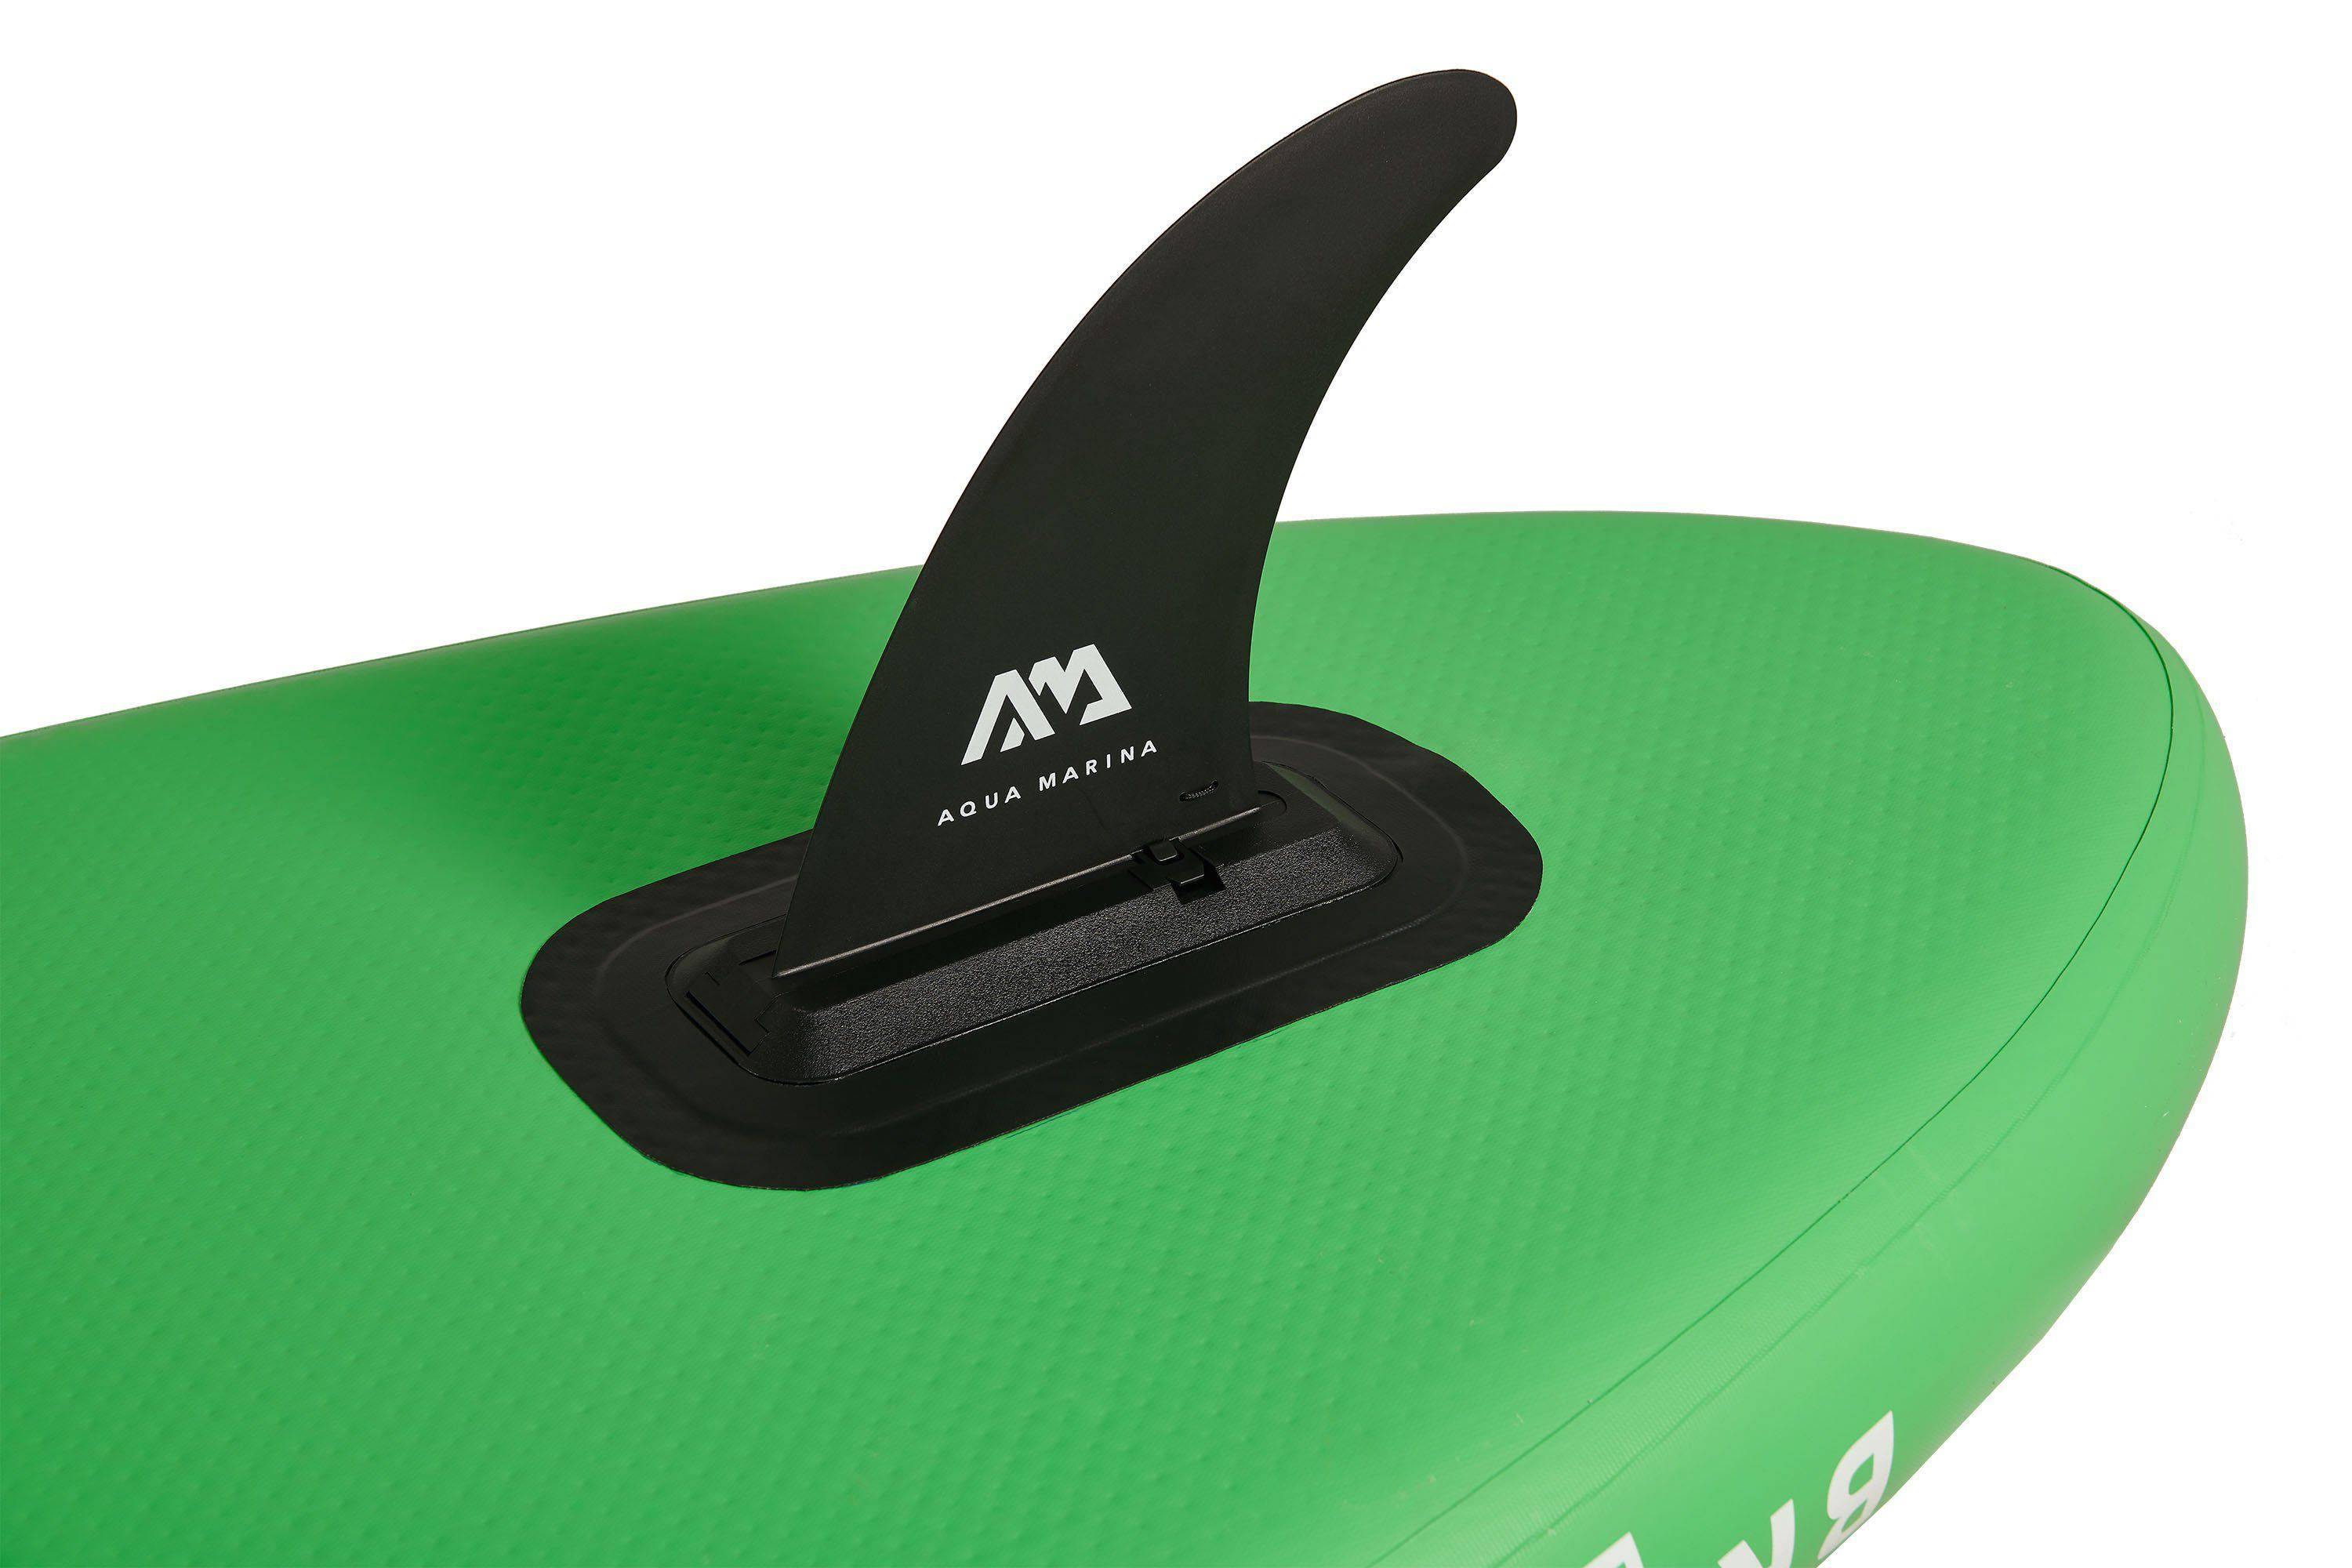 Breeze All-Around iSUP Paddle Board - DTI Direct Canada